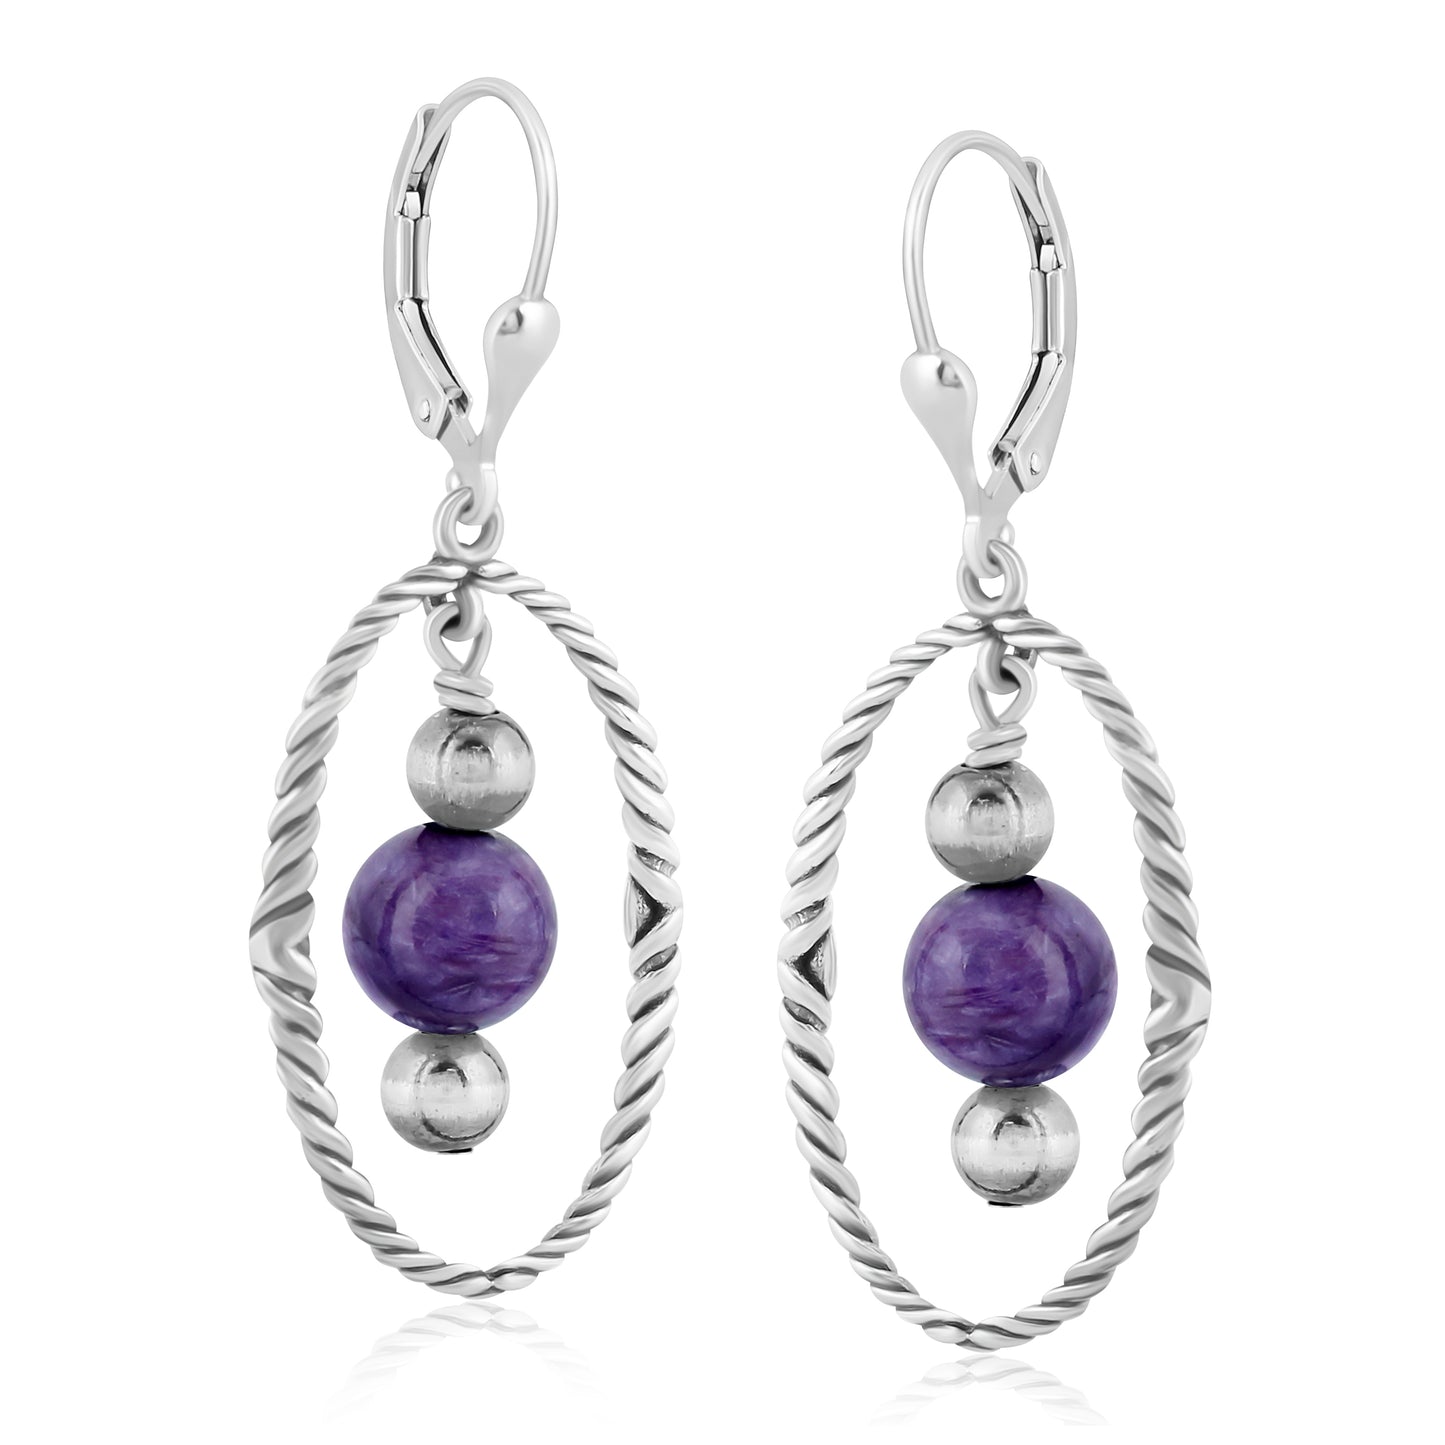 Southwestern Sterling Silver Rope and Charoite Bead Drop Earrings